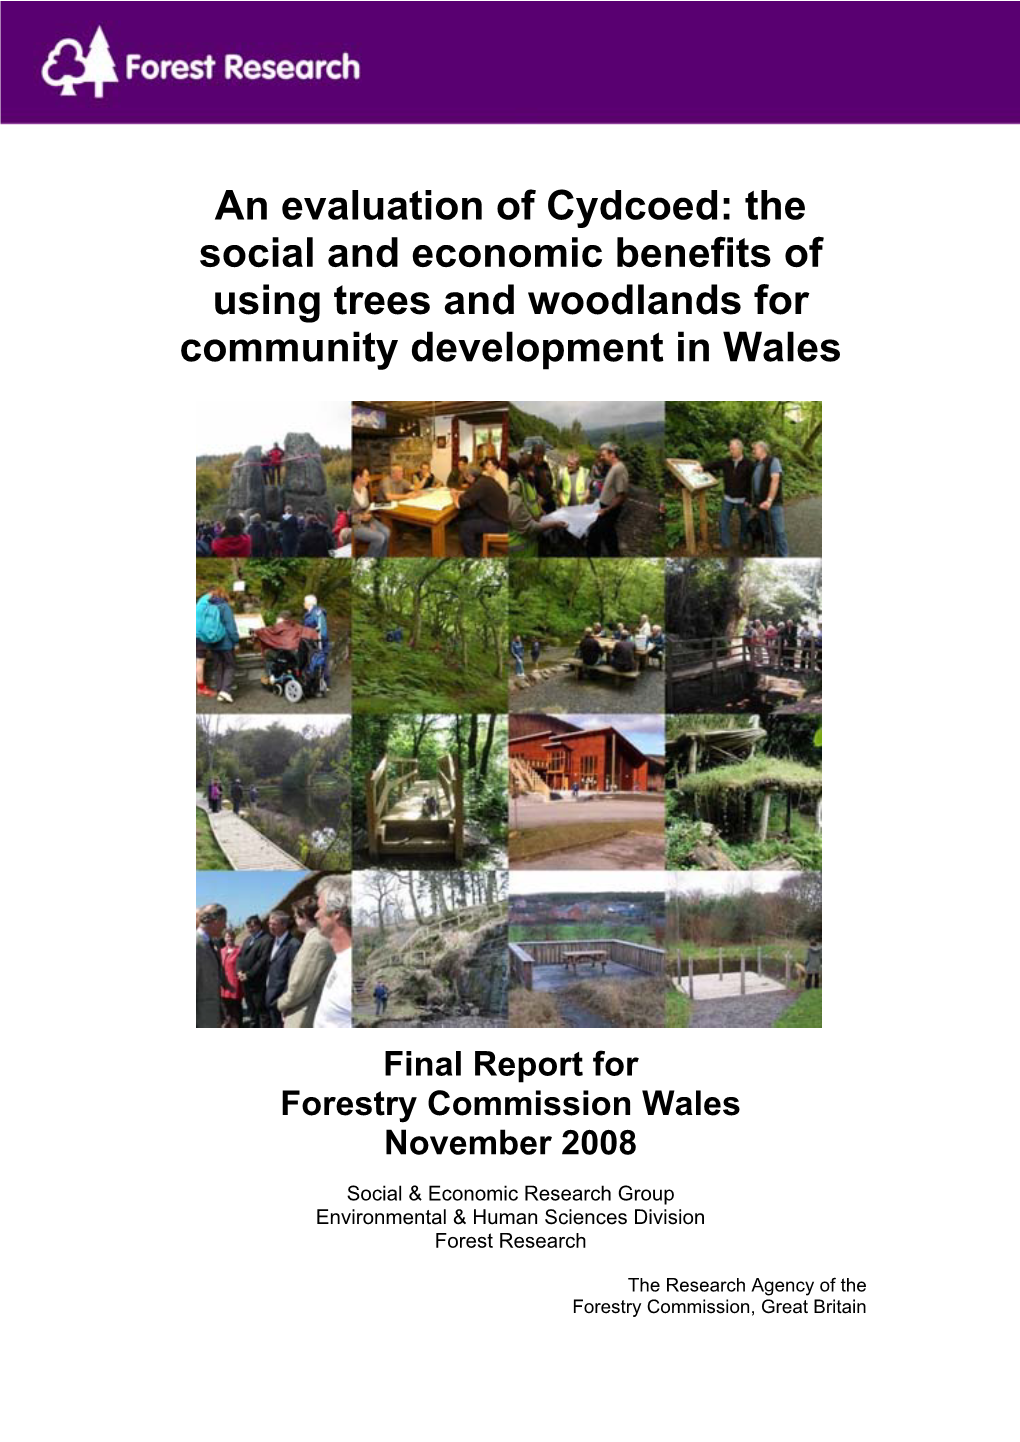 An Evaluation of Cydcoed: the Social and Economic Benefits of Using Trees and Woodlands for Community Development in Wales